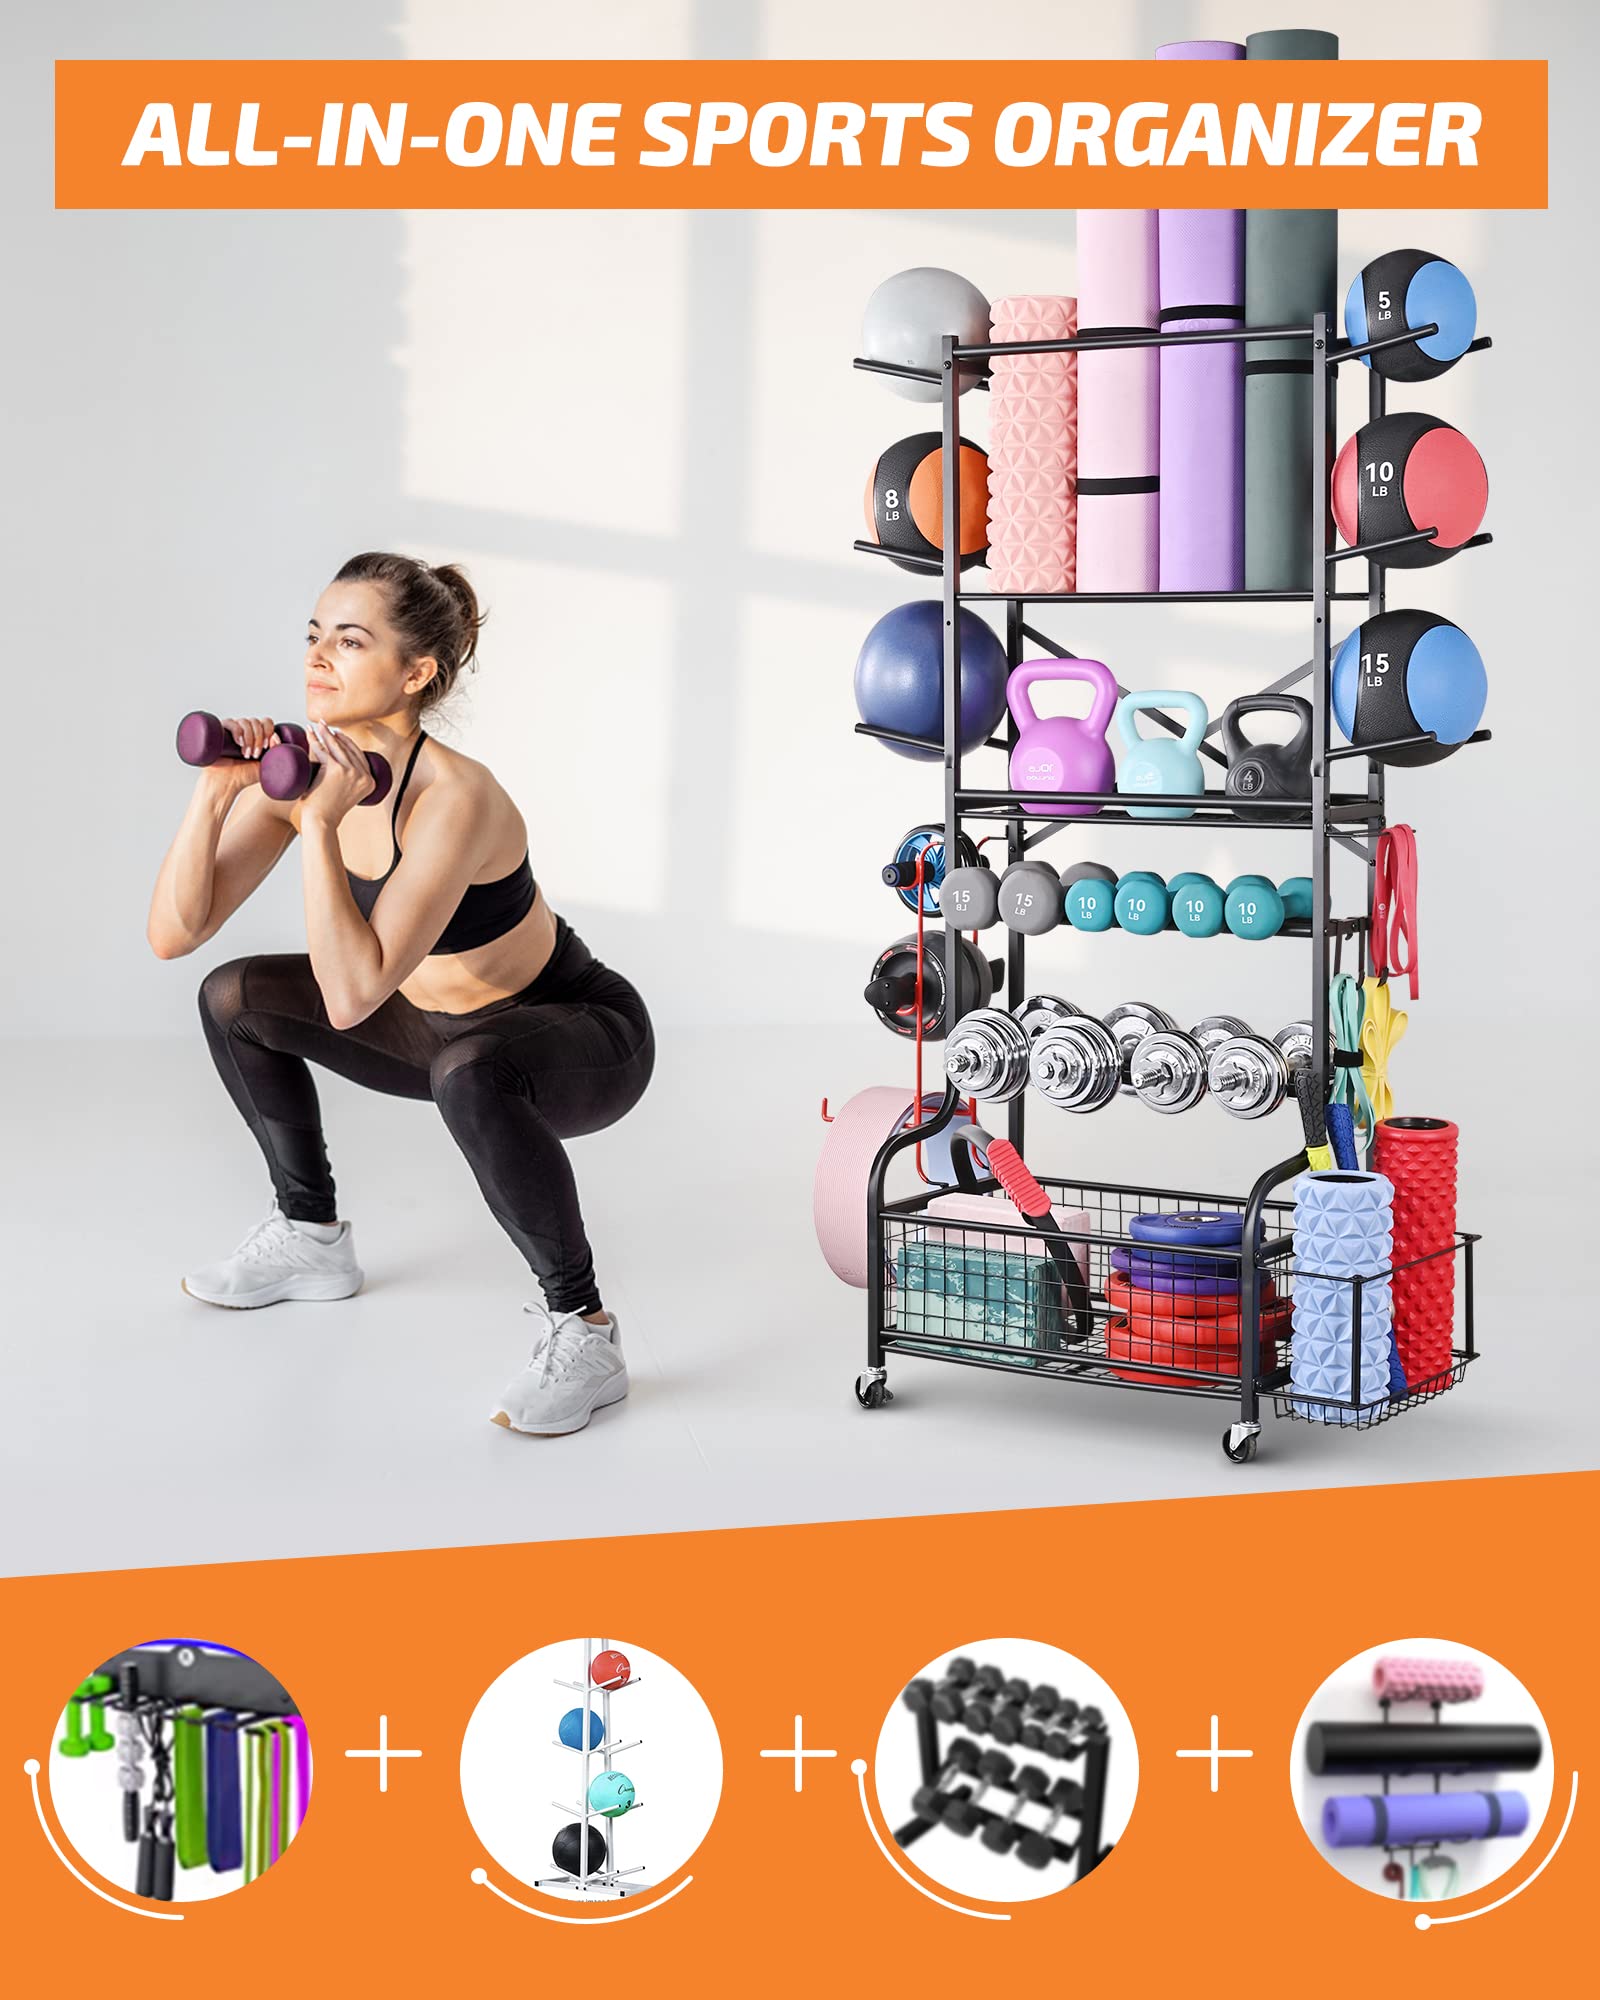  PLKOW Dumbbell Rack, Weight Rack for Dumbbells, Home Gym  Storage for Dumbbells Kettlebells Yoga Mat and Balls, All in One Workout  Storage with Wheels and Hooks, Powder Coated Finish Steel 